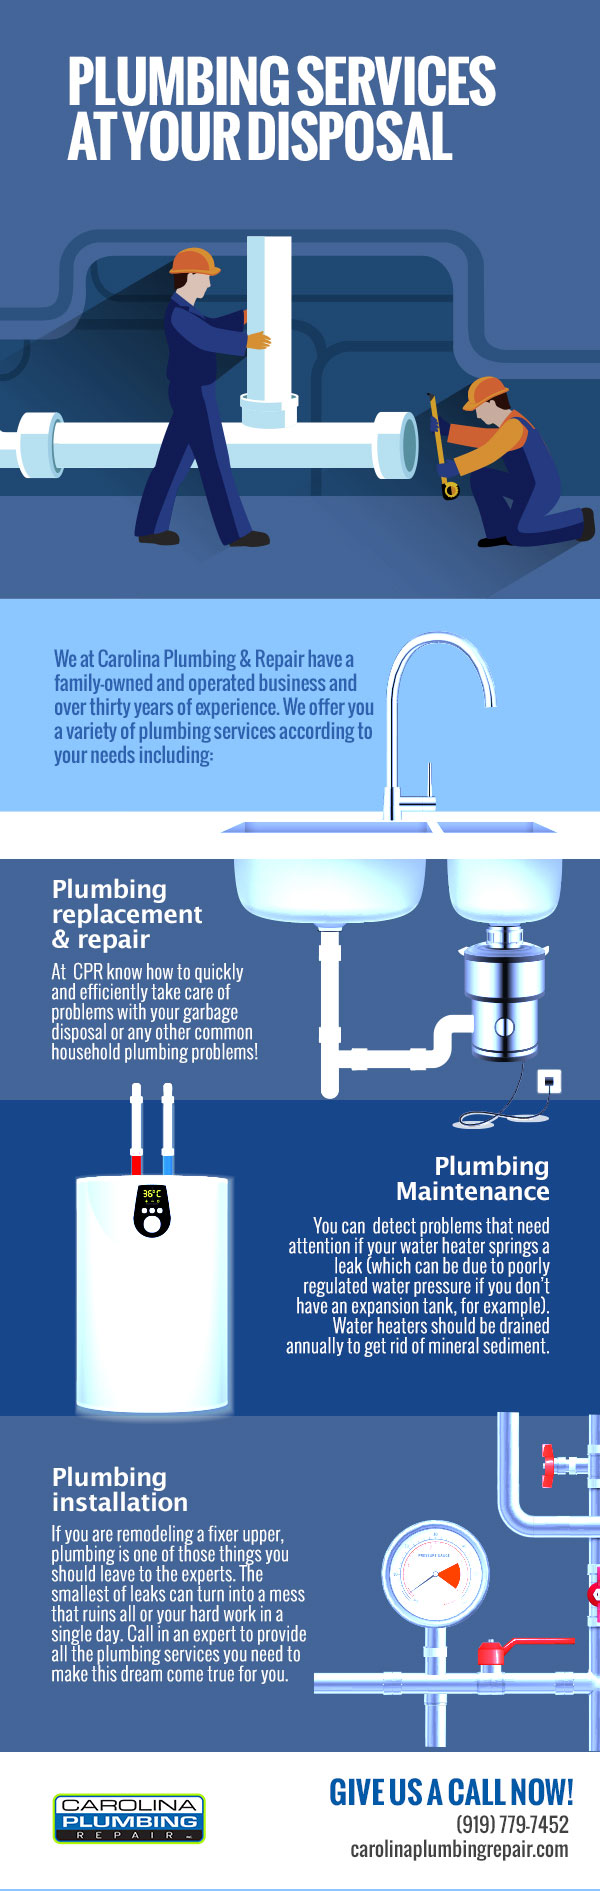 Plumbing Services at Your Disposal